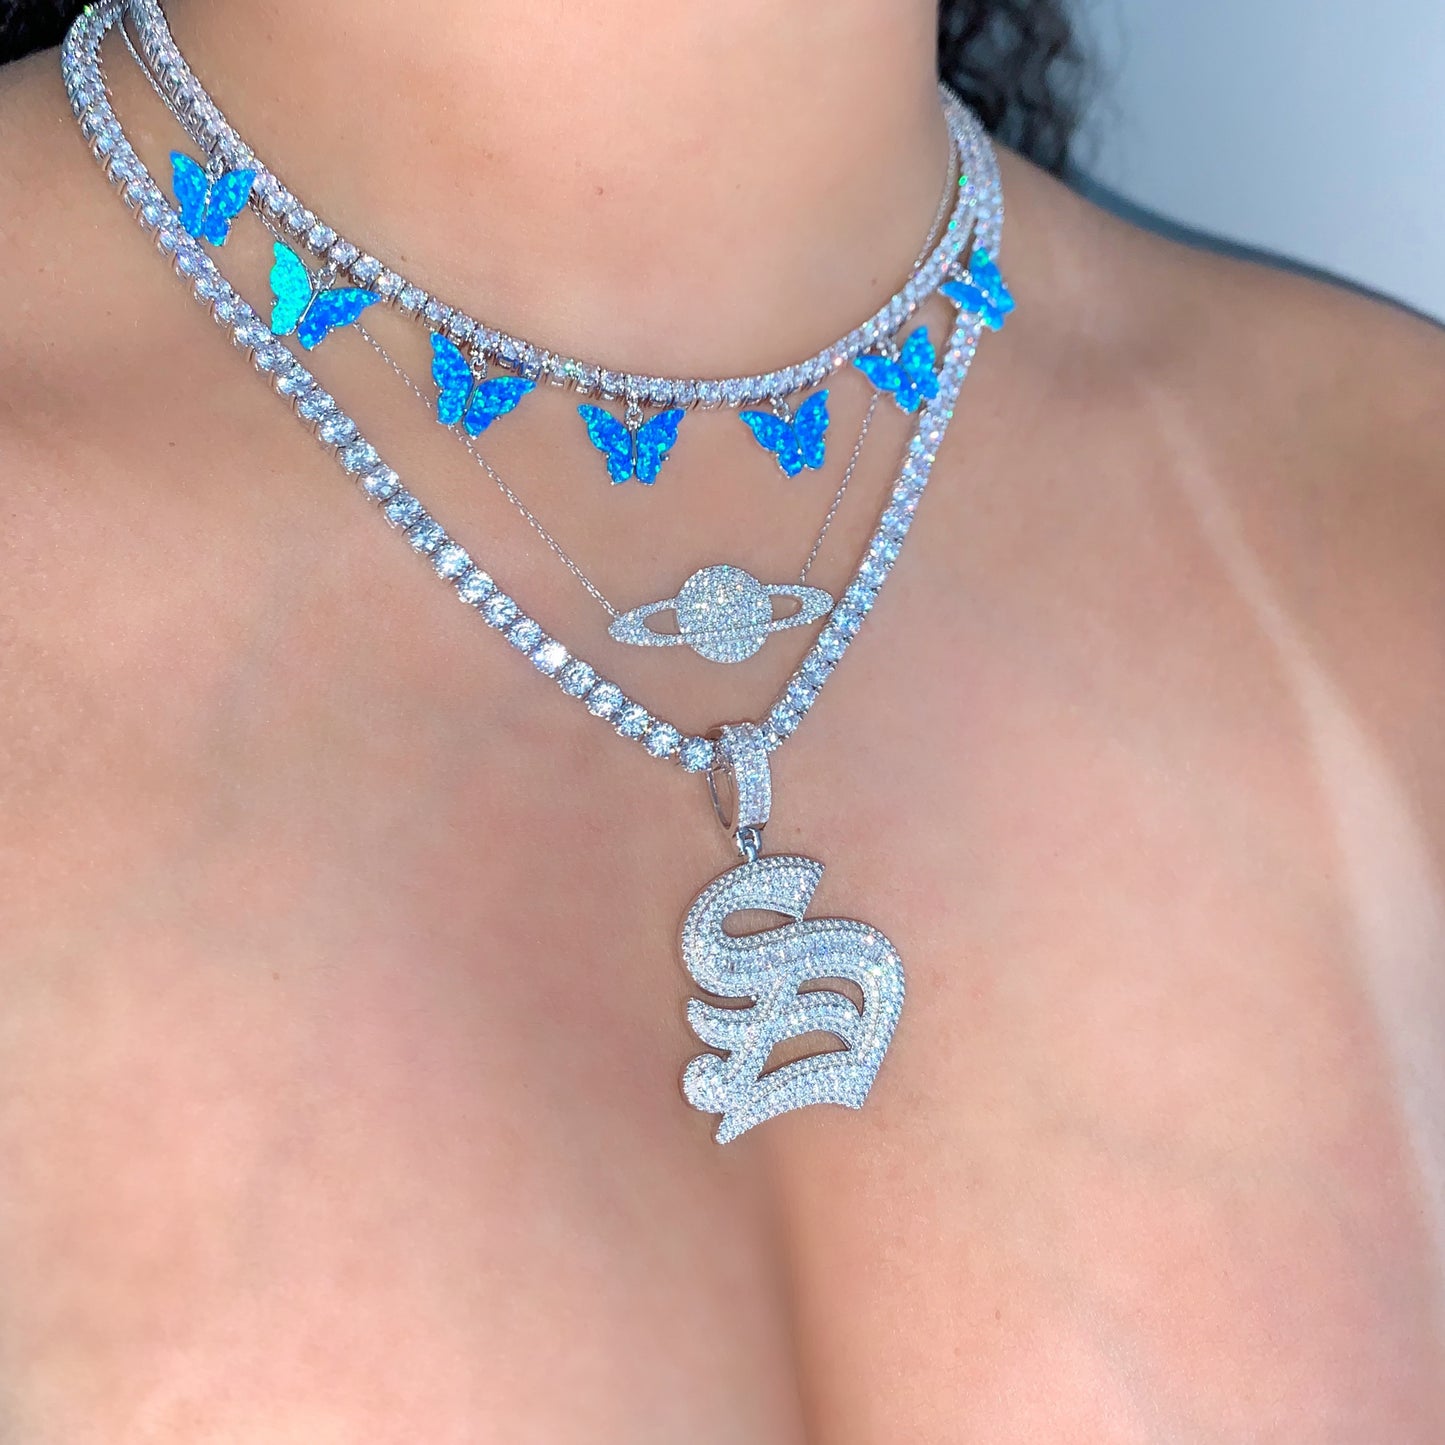 OLD ENGLISH ICY INITIAL NECKLACE